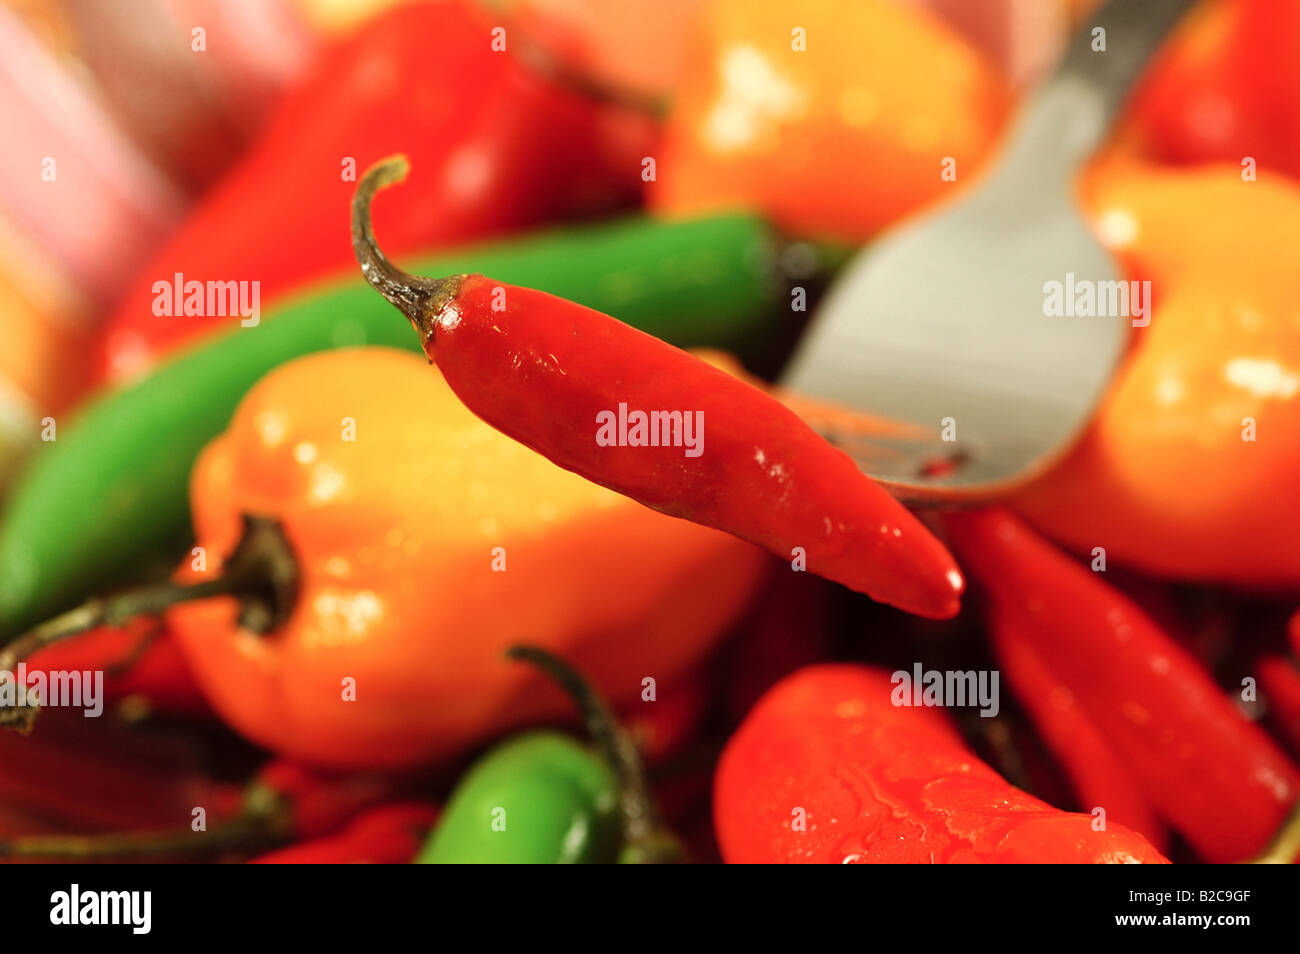 Thai chili on a fork in a festive bowl filled with a variety of hot peppers shallow depth of field Stock Photo